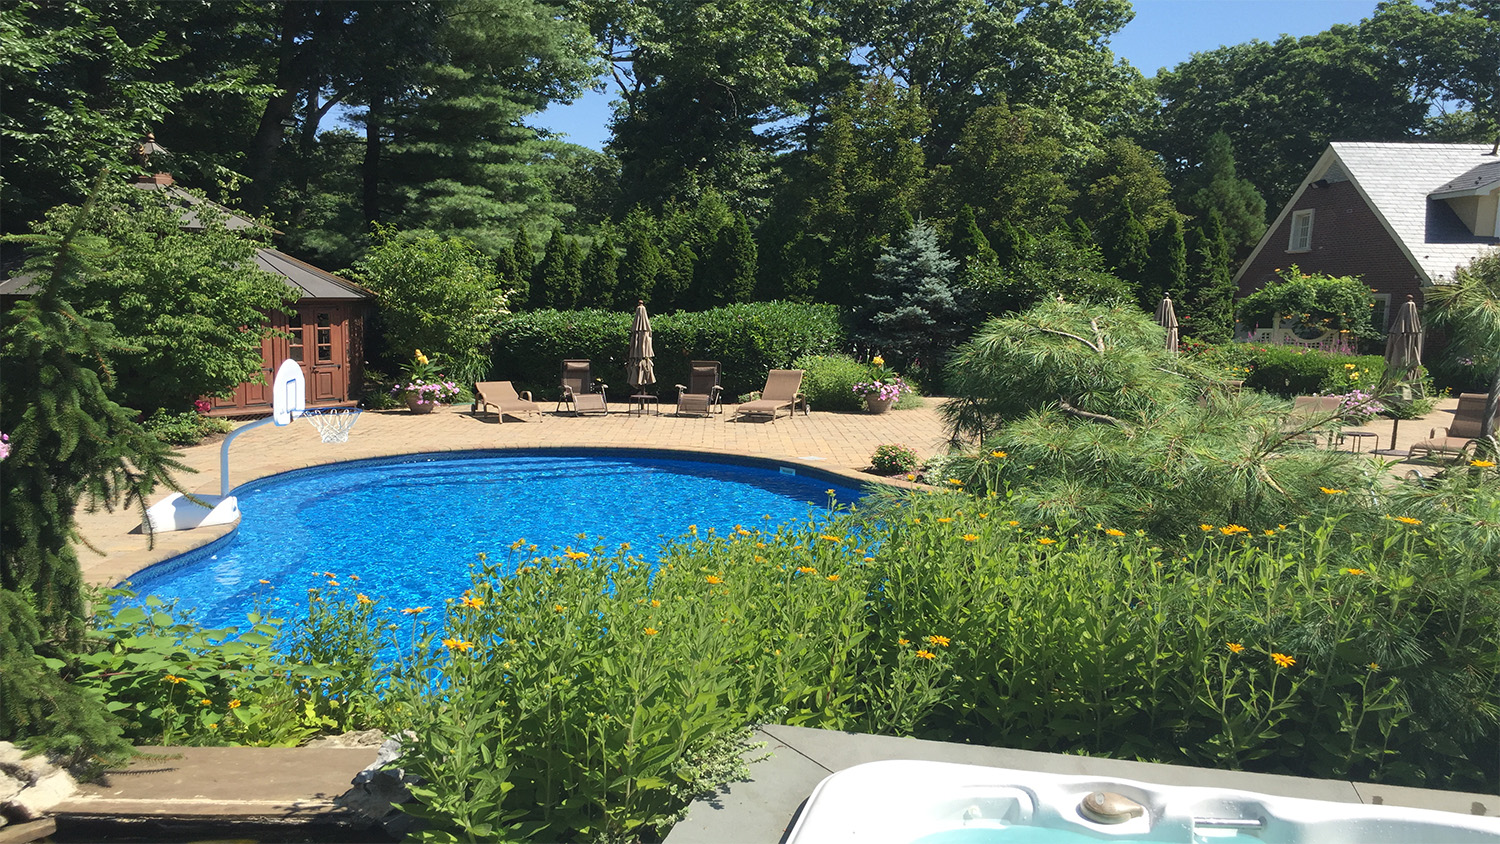 Professional landscape design company with pool area in Long Island, NY